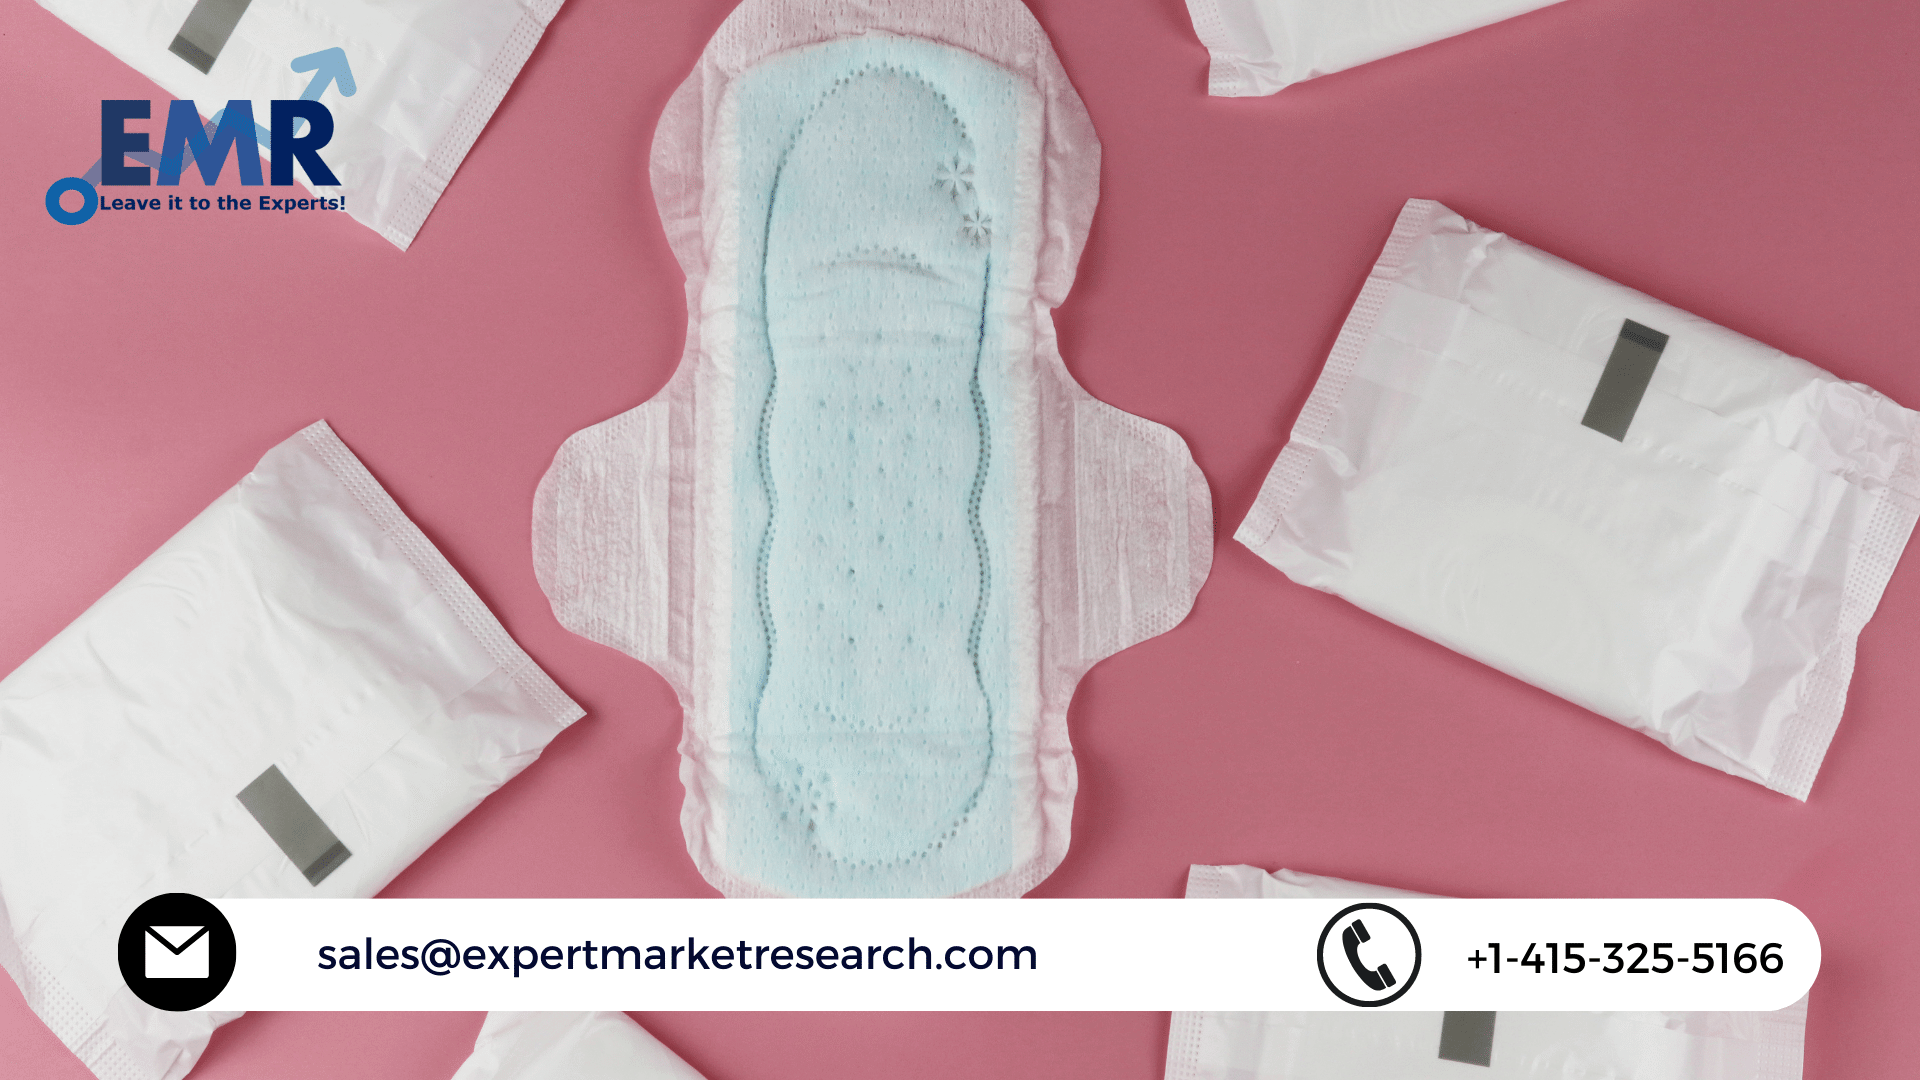 Sanitary Napkin Market Report, Size, Share, Growth, Analysis, Price Trends, Outlook, Key Players and Forecast Period 2022-2027